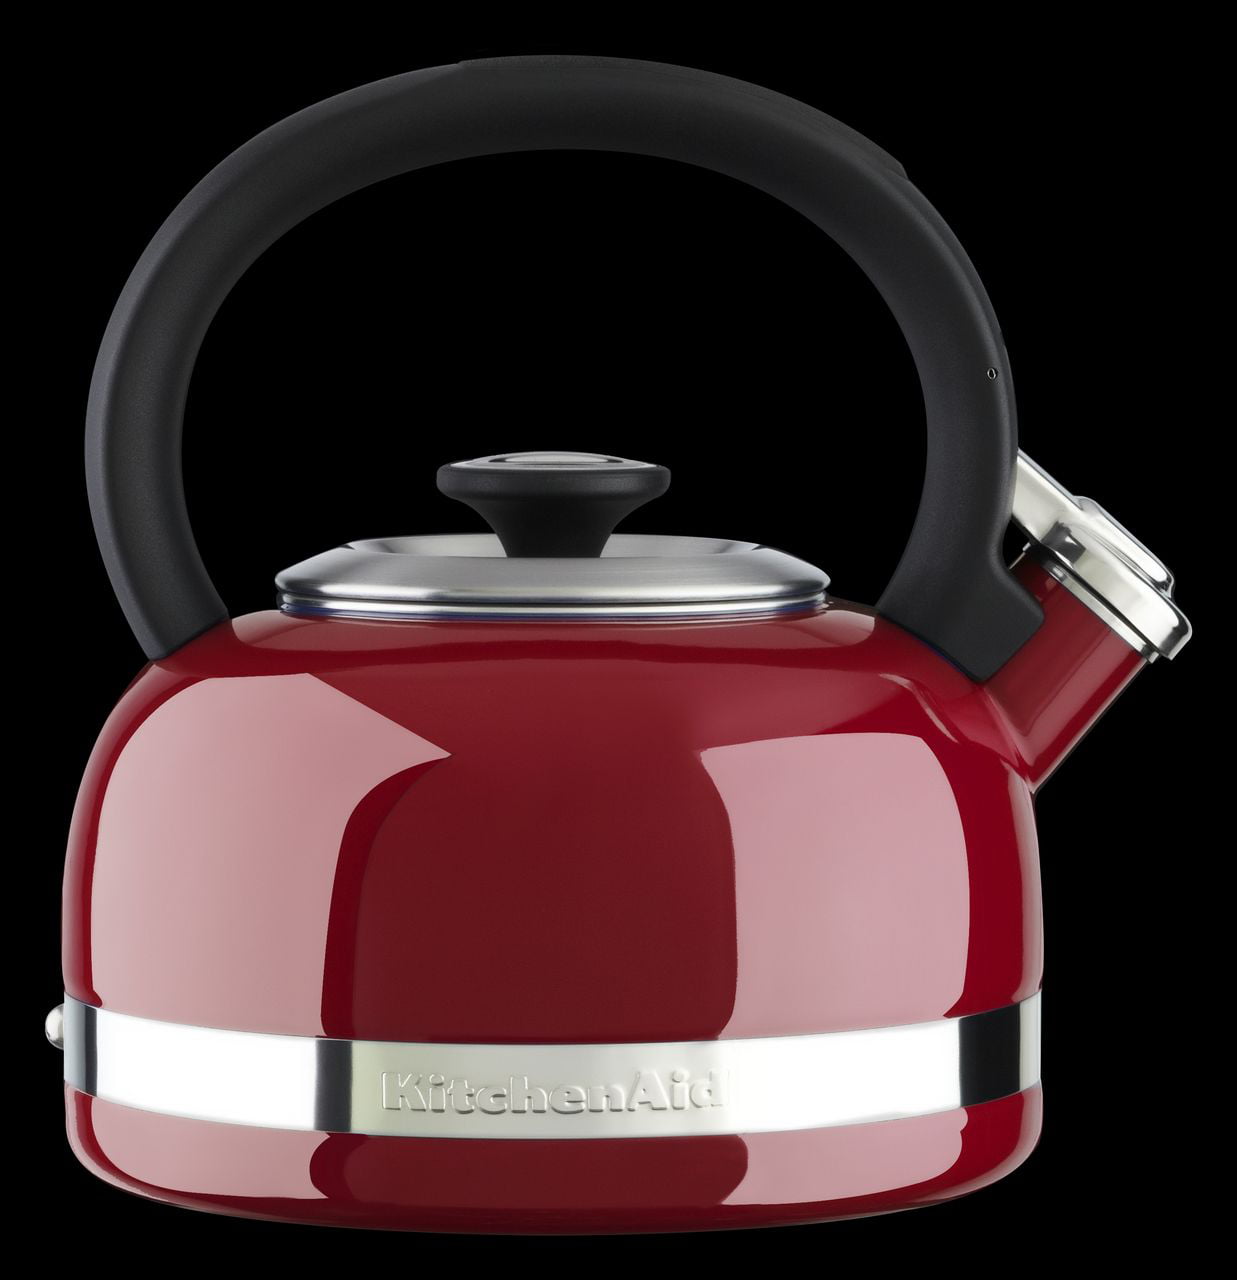 KitchenAid Artisan Kettle review: Stylish, functional and effective